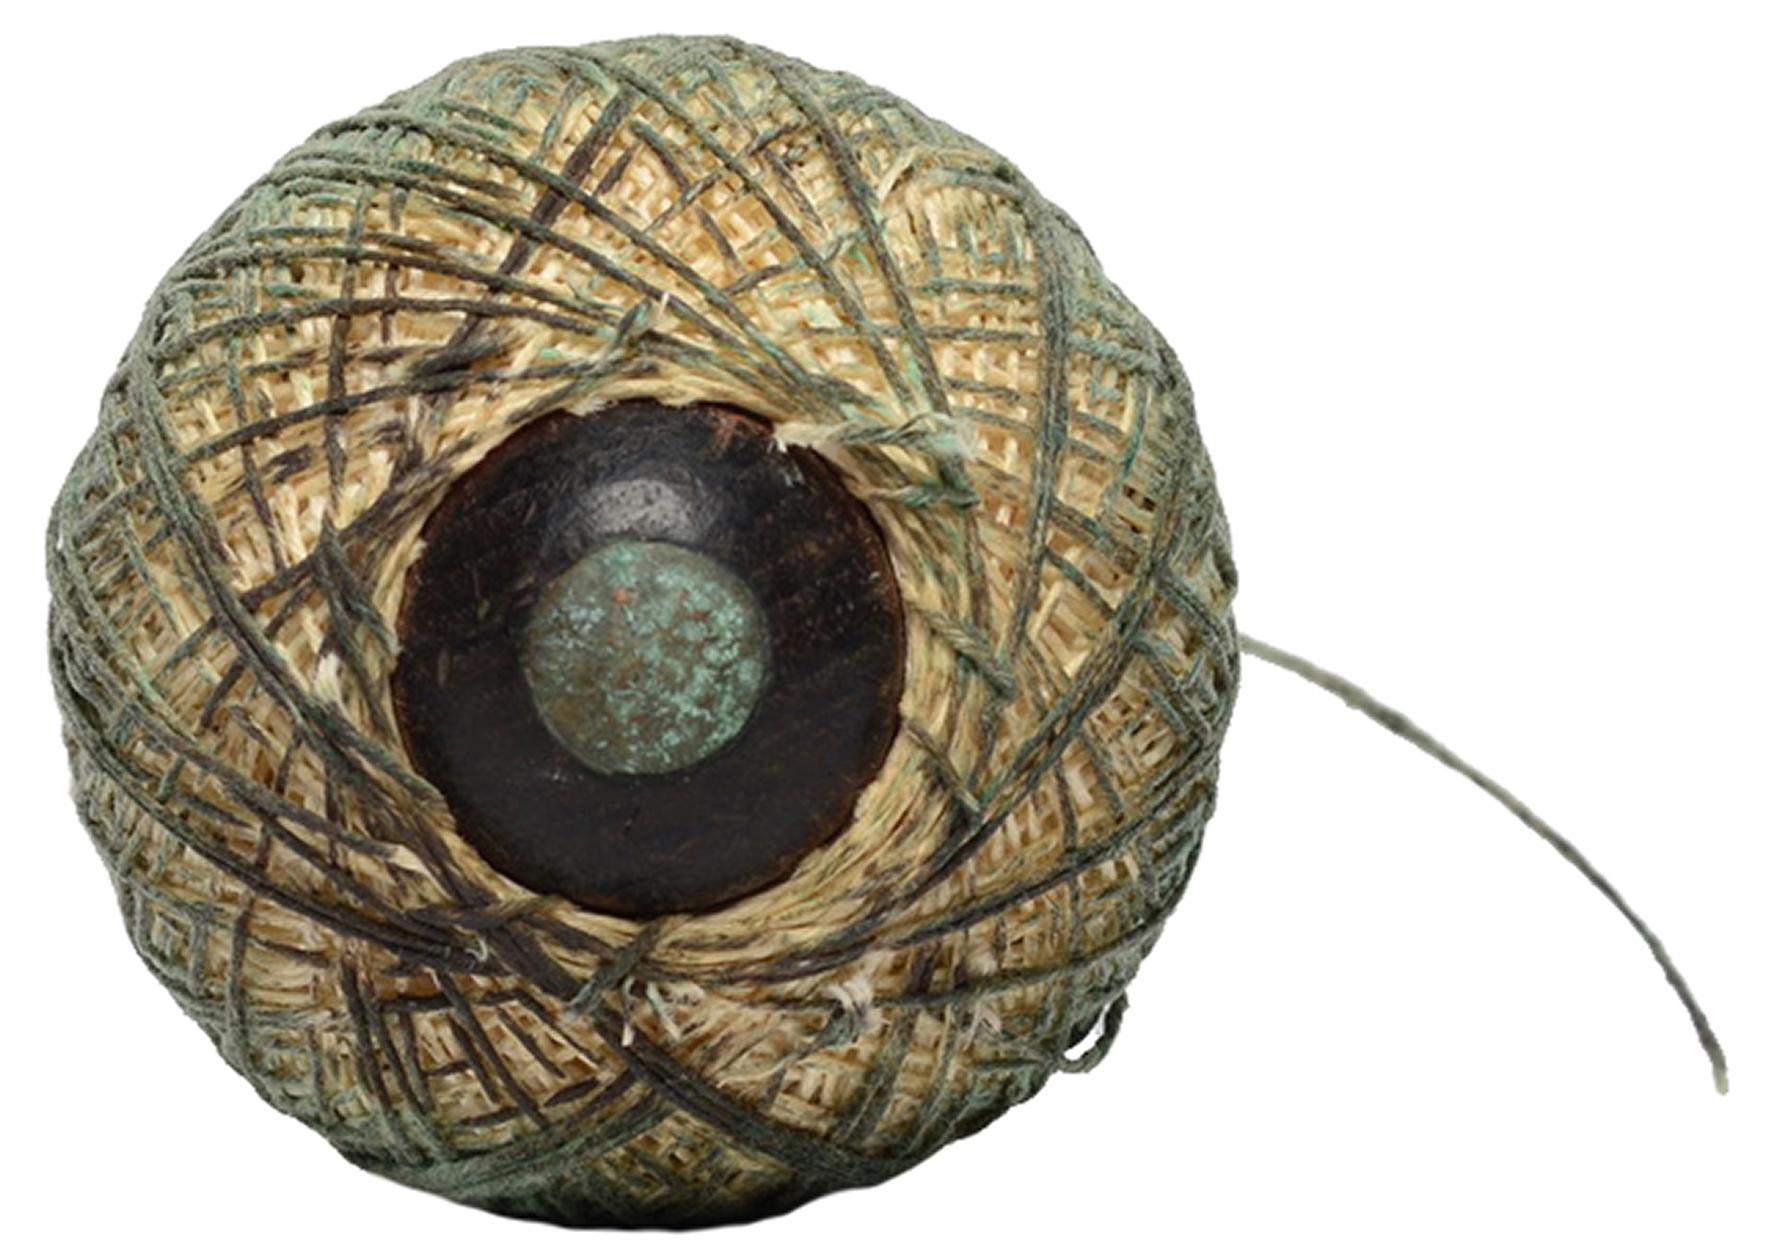 An exceptionally rare handmade gong mallet by Harry Bertoia ca, 1960

Harry usually used found objects and spare pieces of wood to create mallets for his various gongs. Ordinarily consisting of a spare rag wrapped around a ball or wood, and a pole